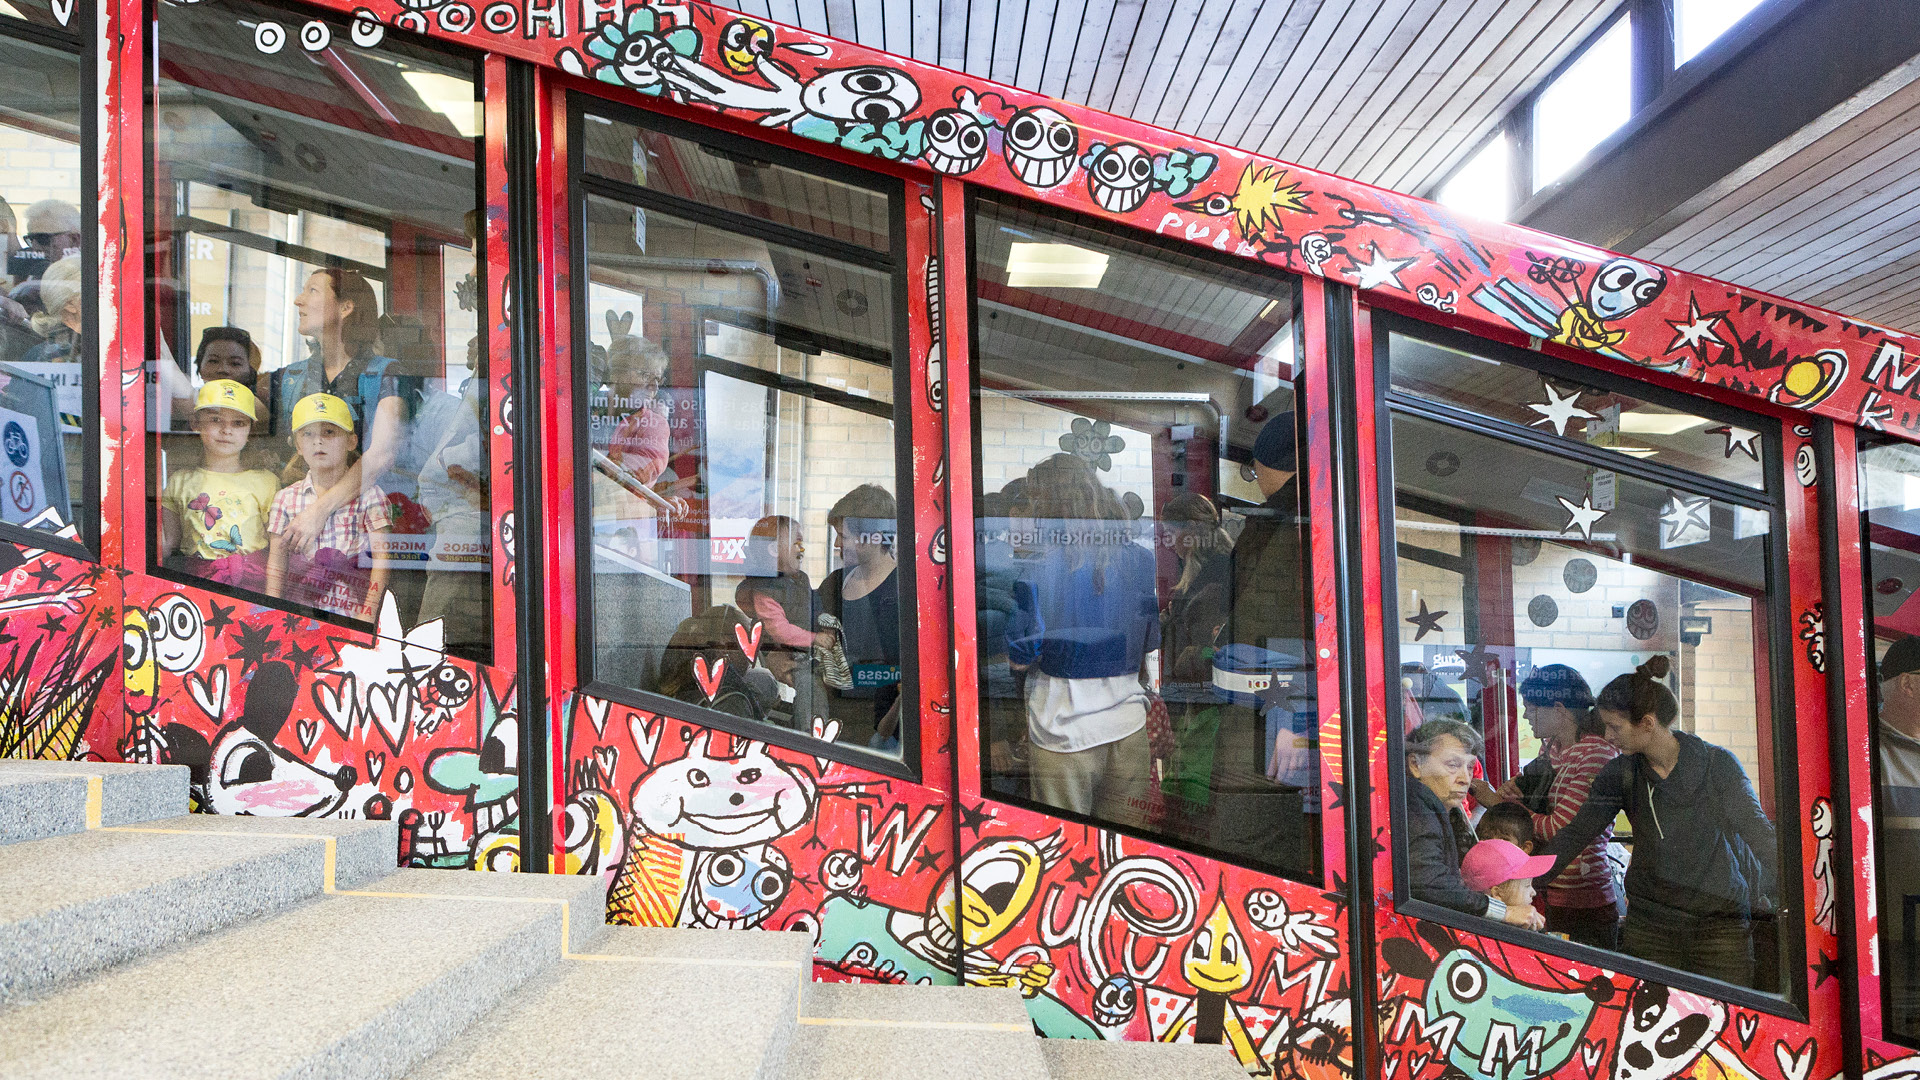 Different comic illustrations on the funicular designed by M.S. Bastian.